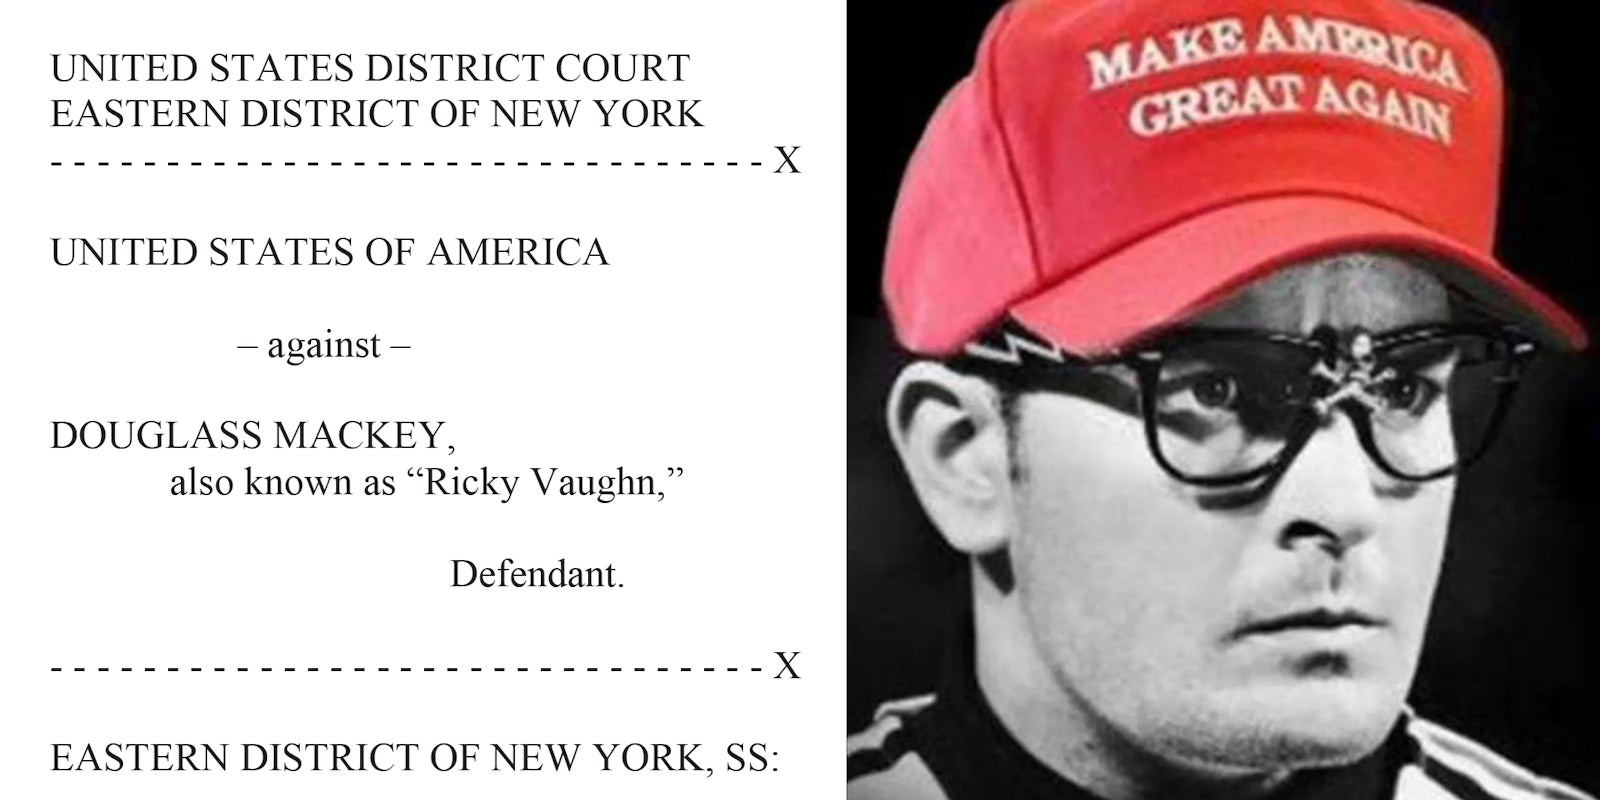 Court document for Ricky Vaughn(l), Ricky Vaughn meme profile picture(r)